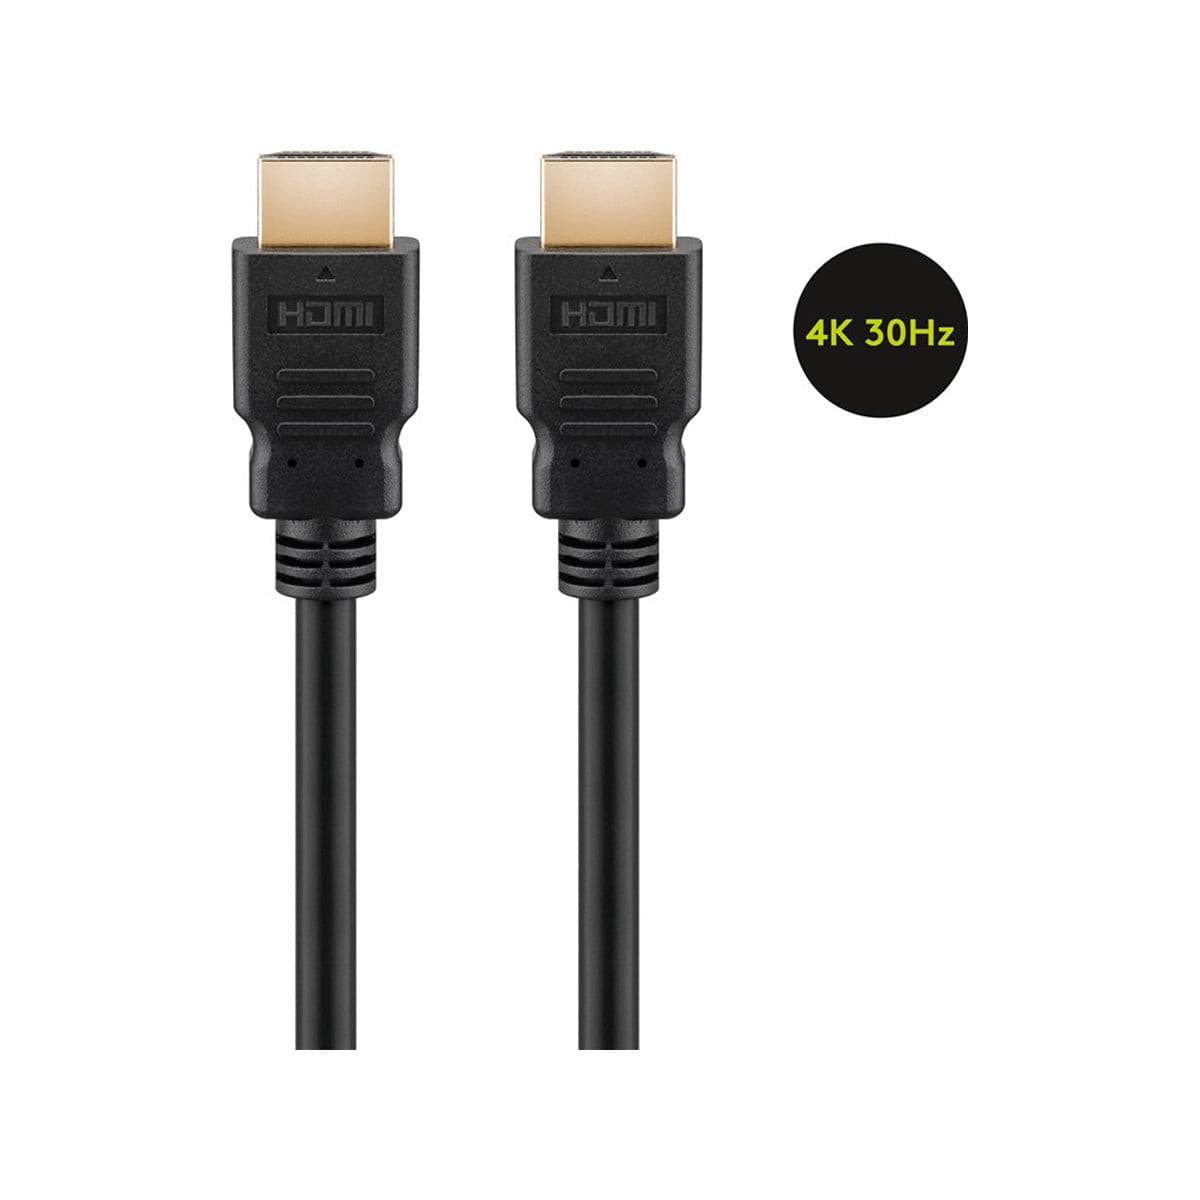 Goobay HDMI High Speed Cable with Ethernet for PlayStation or Xbox - Black.